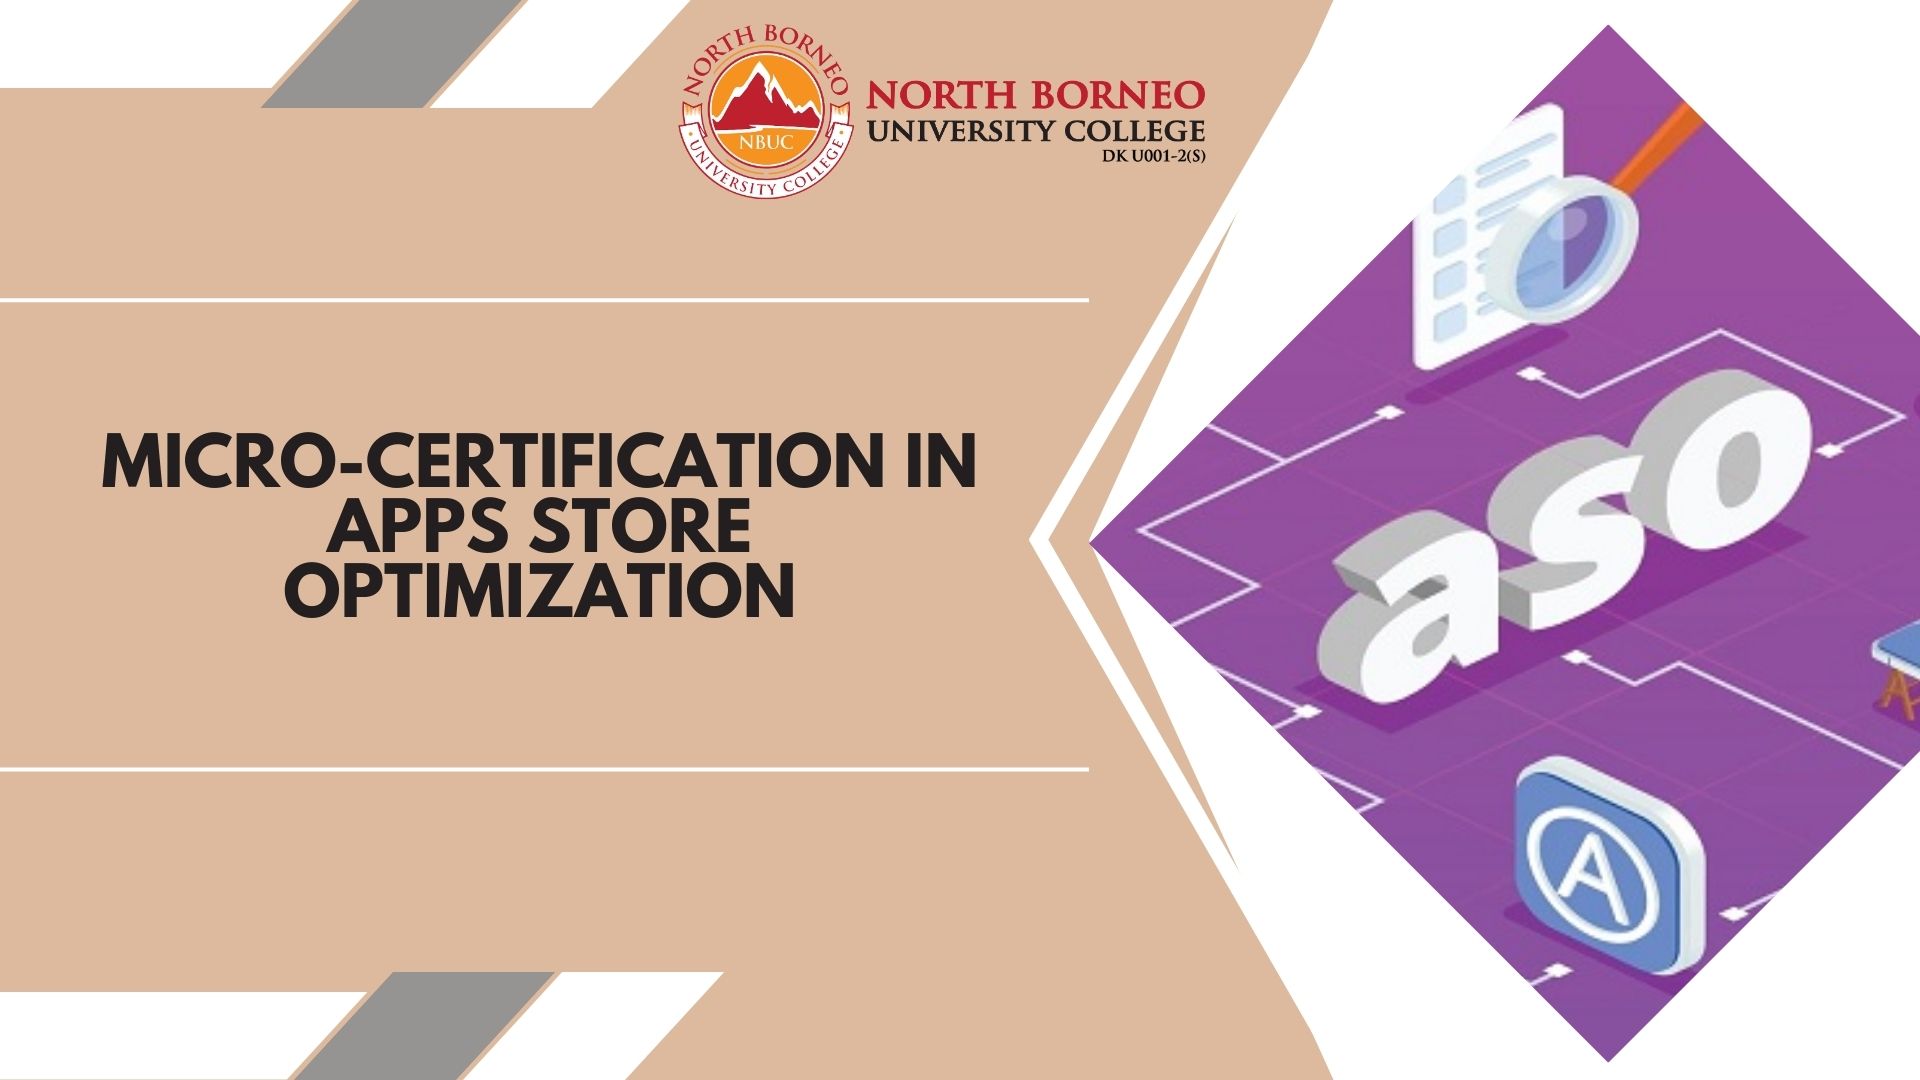 MICRO-CERTIFICATION IN APPS STORE OPTIMIZATION